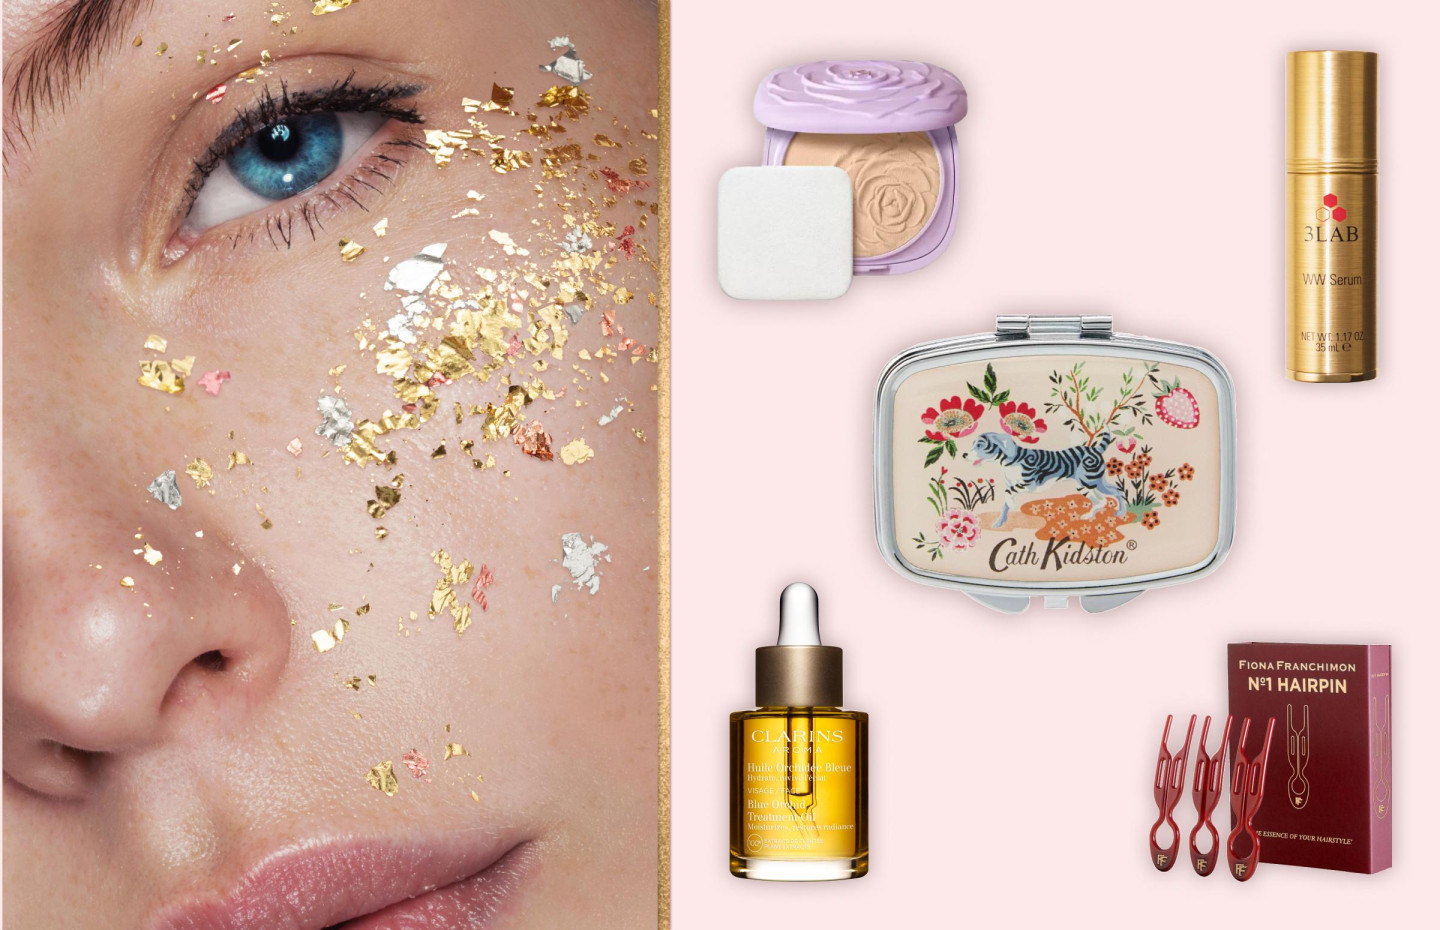 From serum with gold to aroma with lavender: beauty gifts for March 8